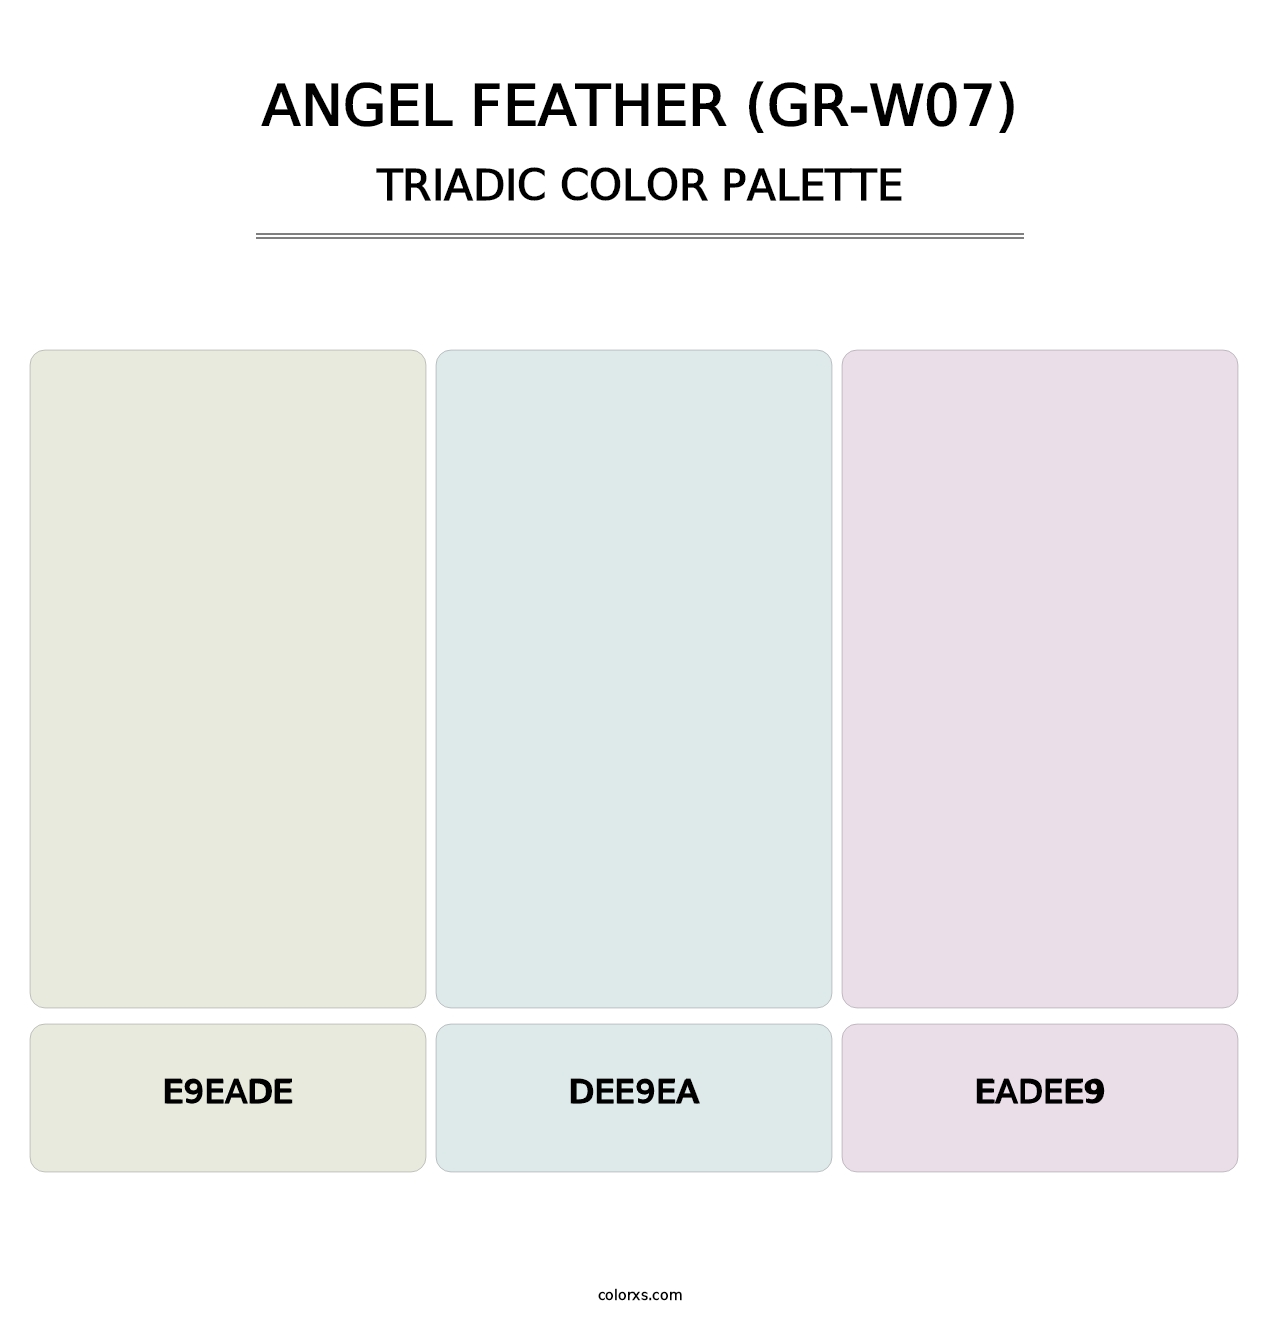 Angel Feather (GR-W07) - Triadic Color Palette